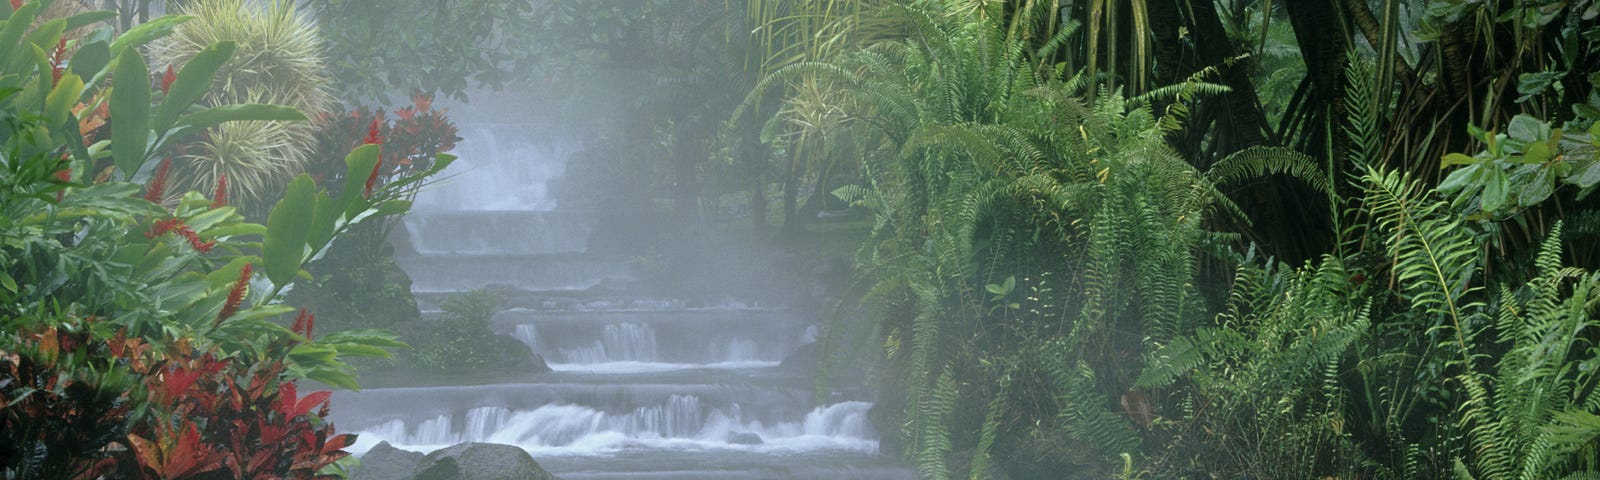 Steamy hot springs surrounded by tropical foliage.